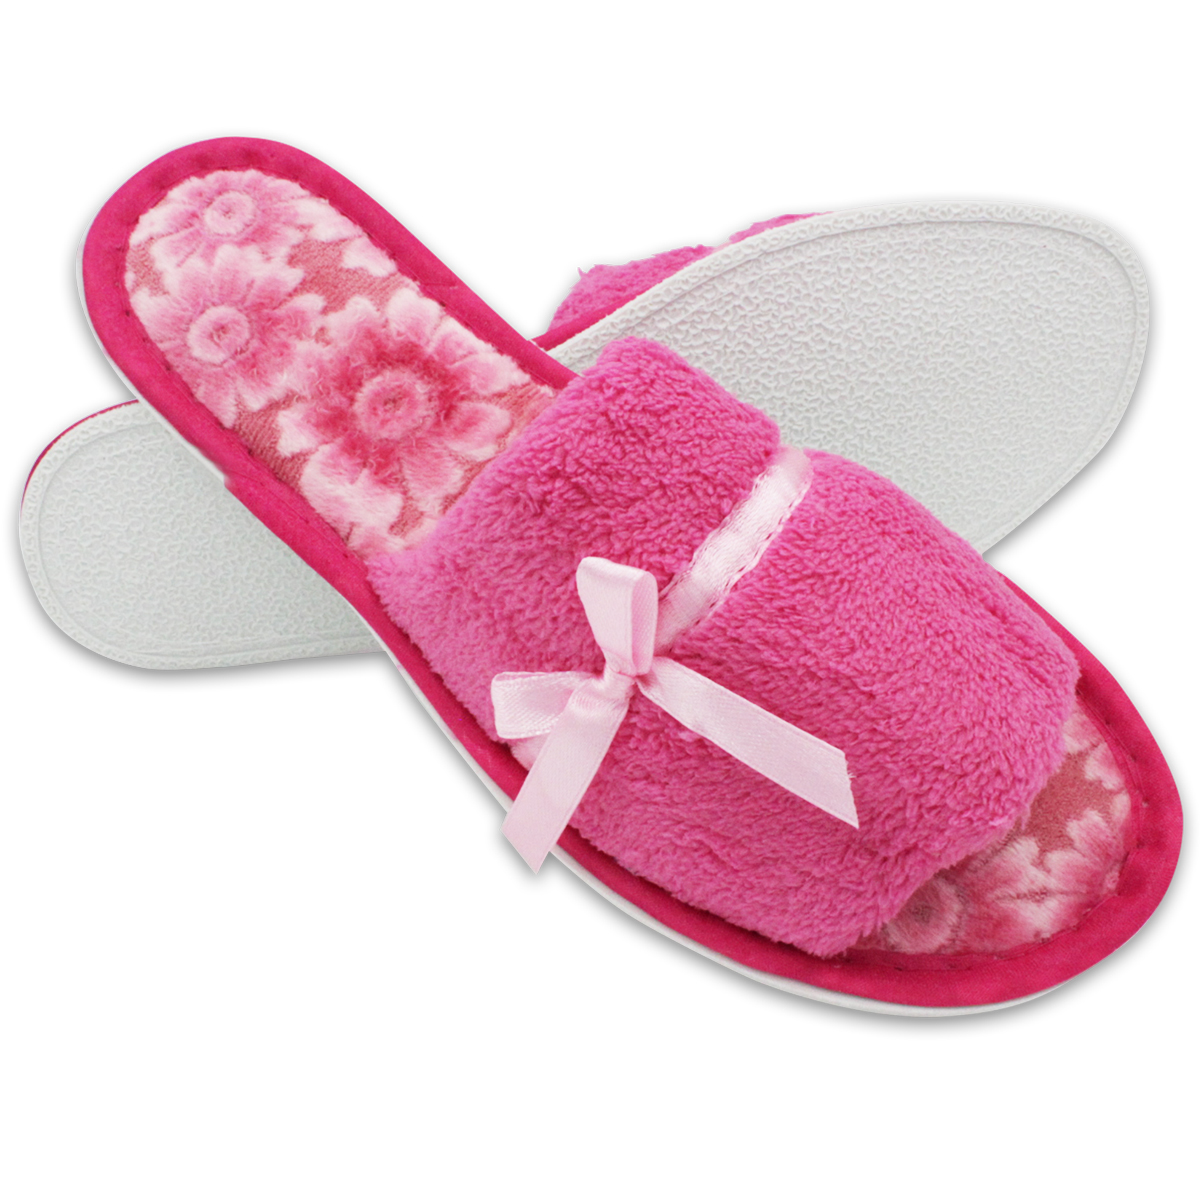 women's terry cloth house slippers